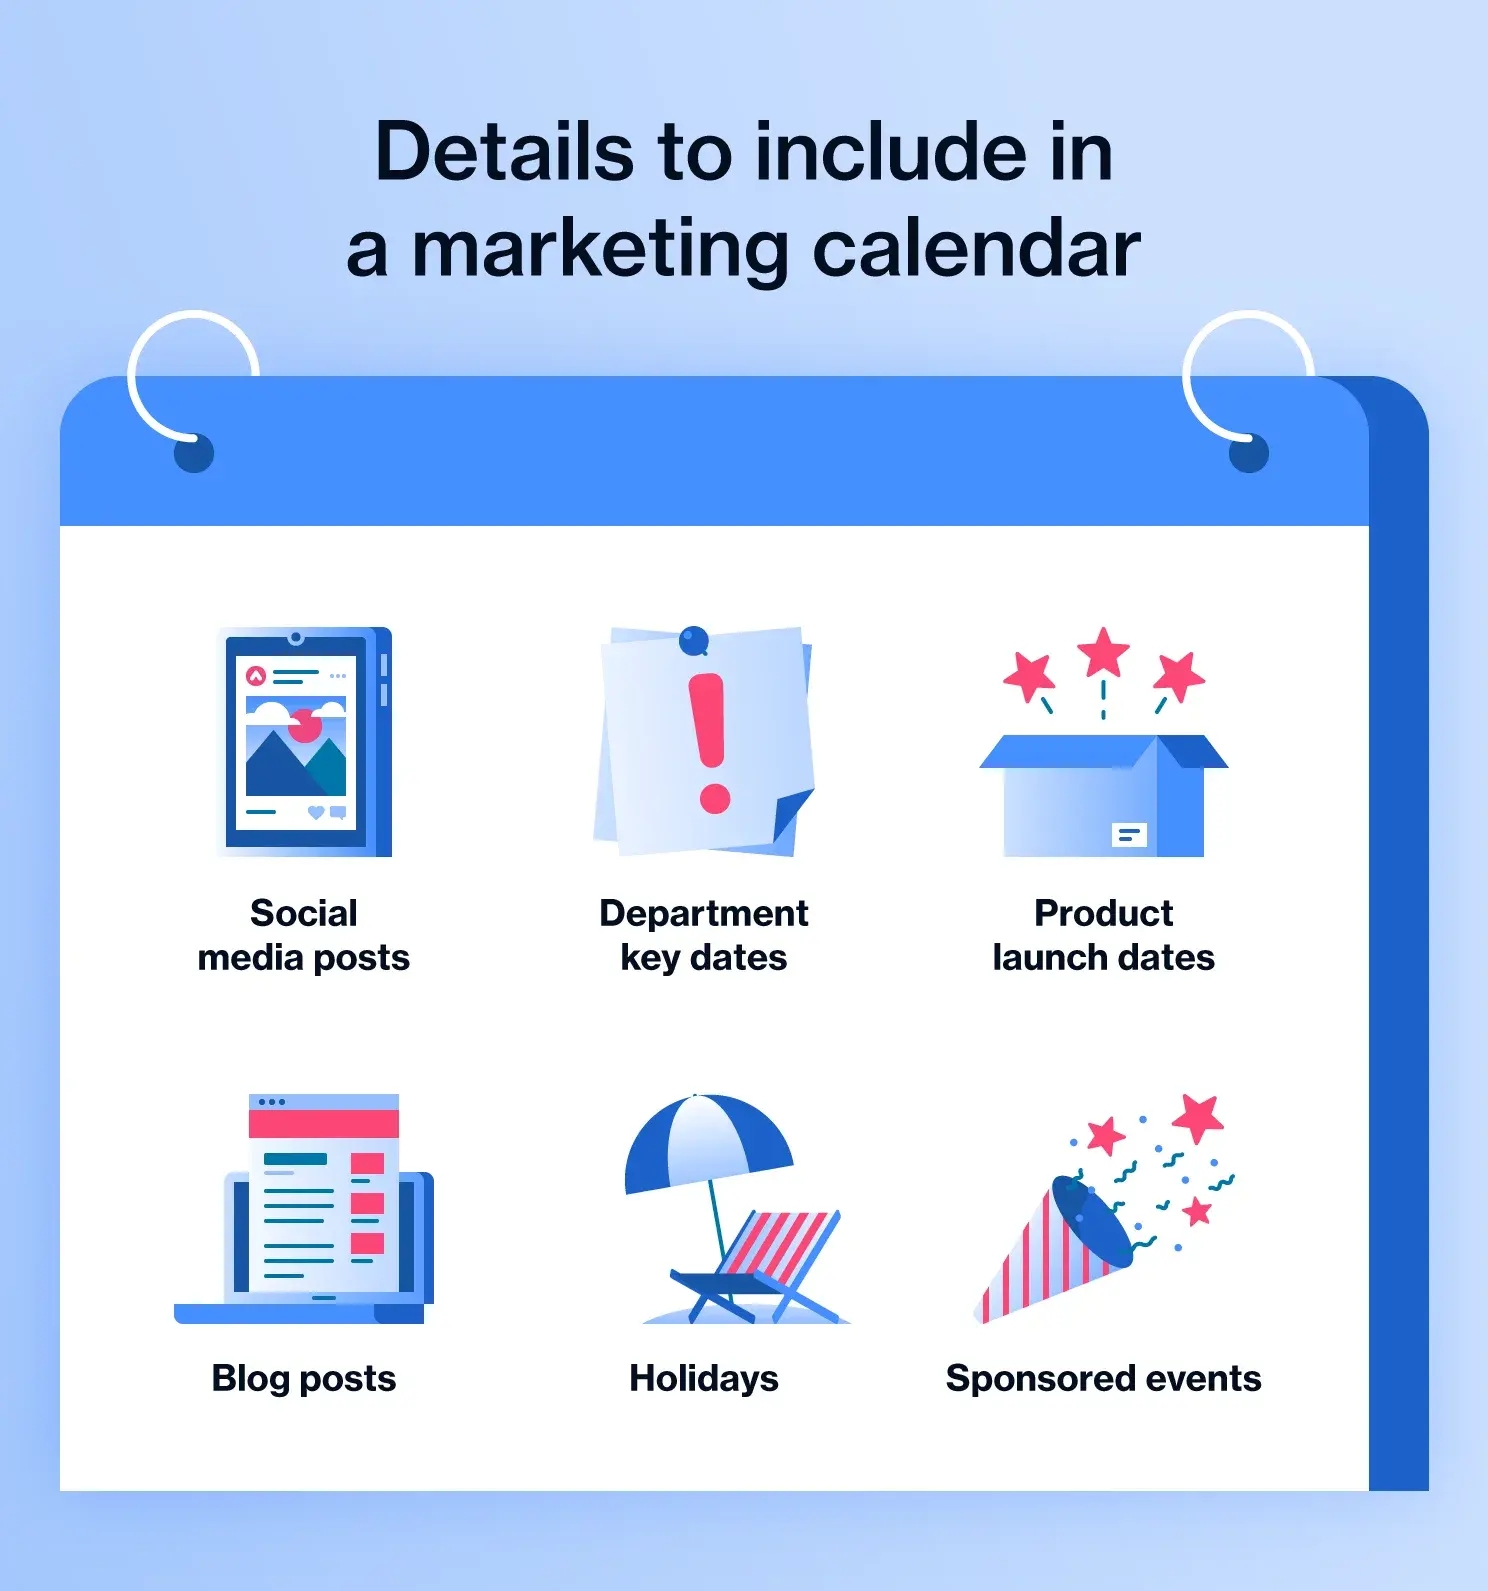 details-to-include-in-a-marketing-calendar.webp